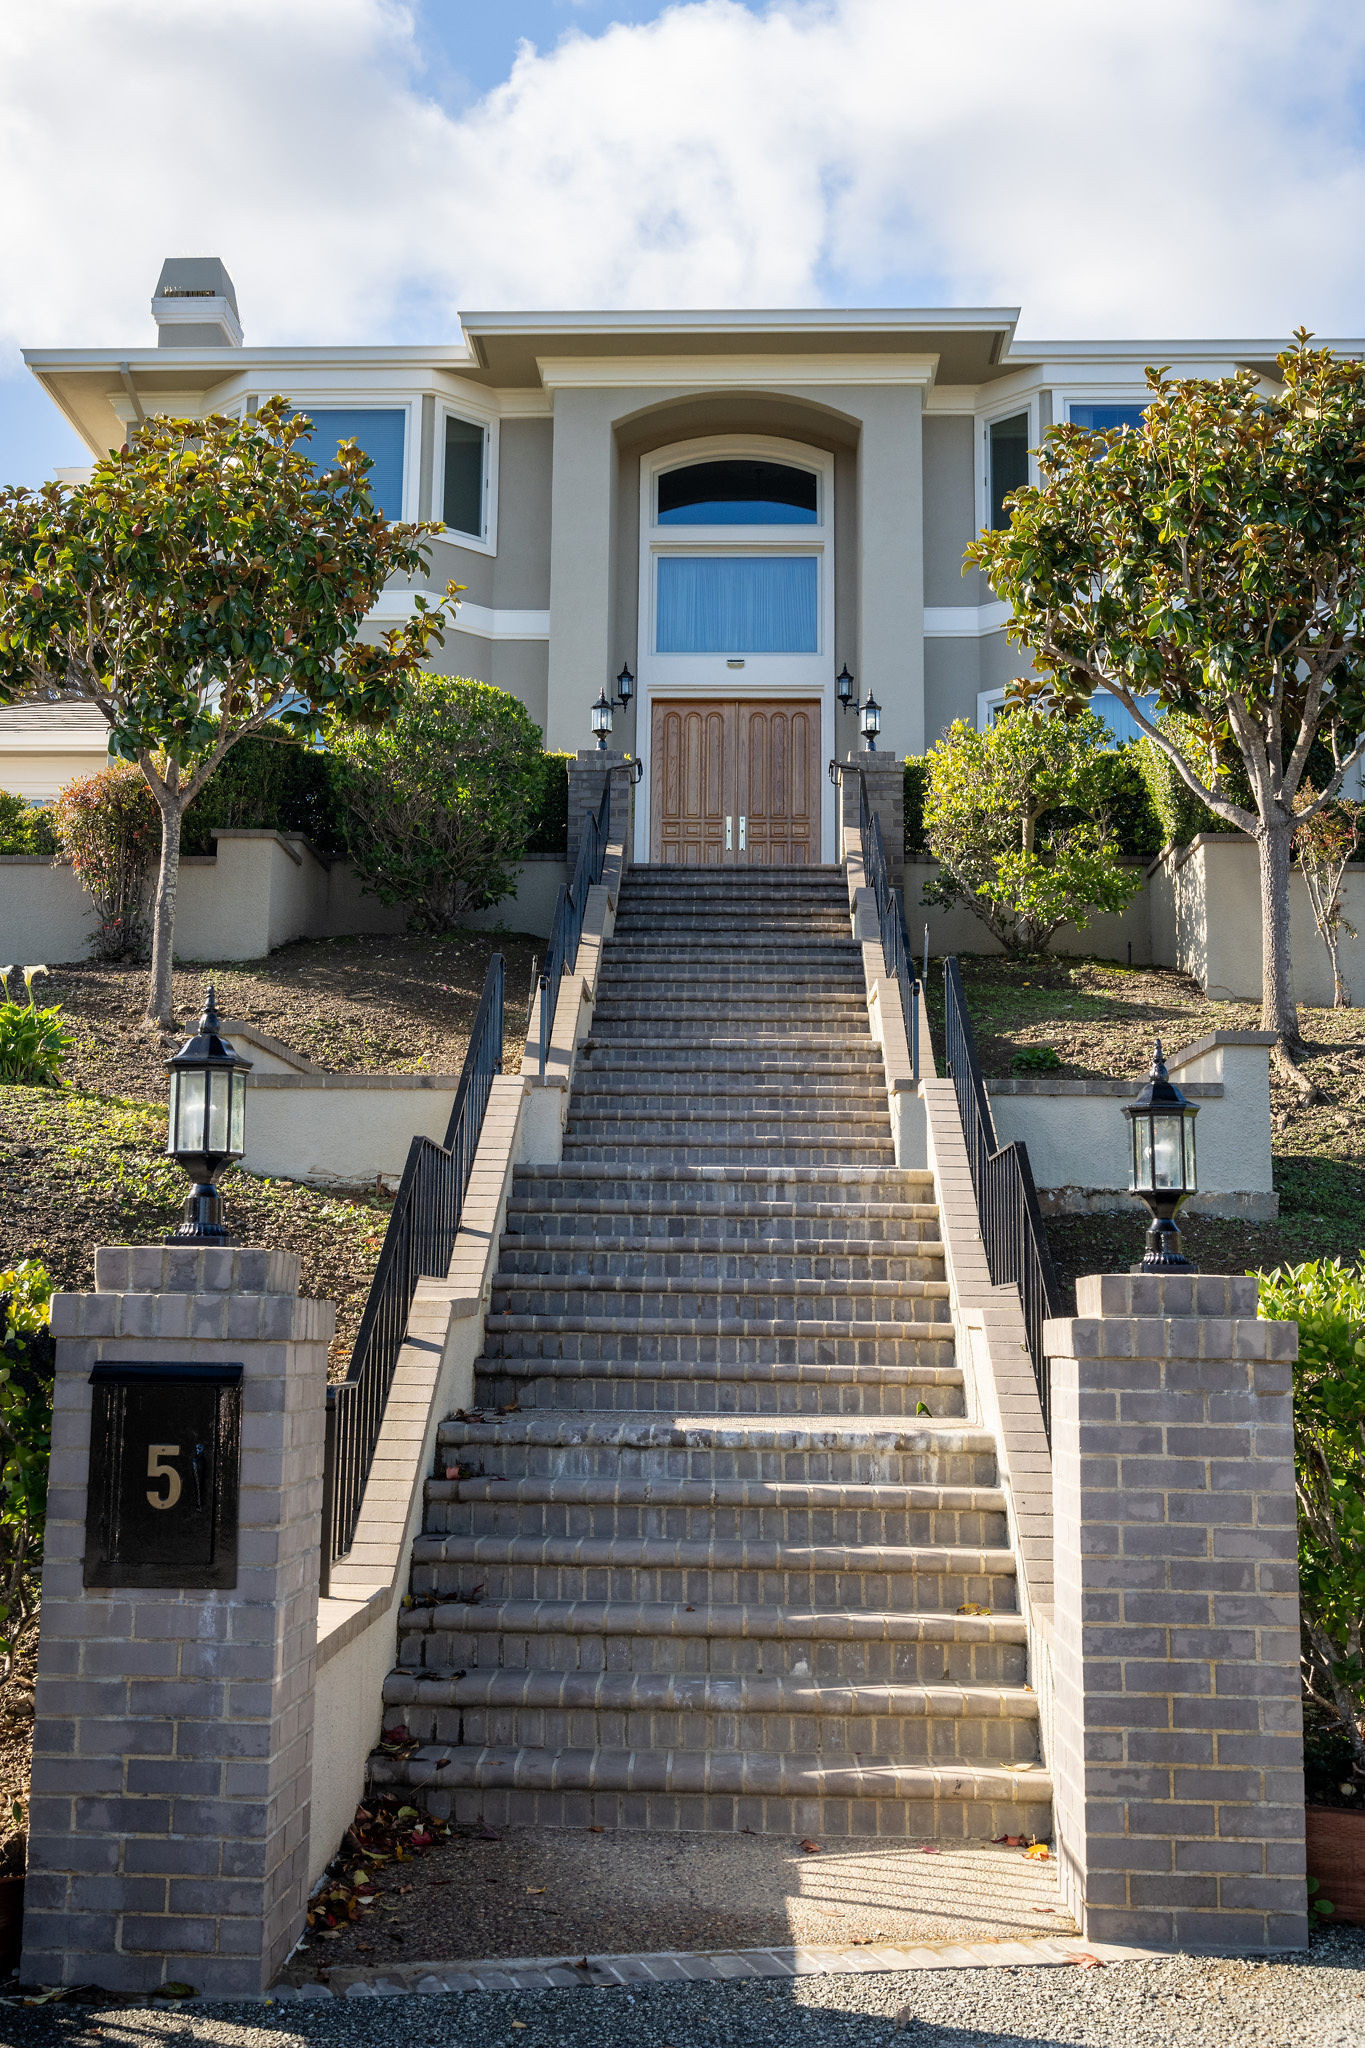 Baywood Knolls brick pillars with lamps and long steps to the front door in San Mateo.